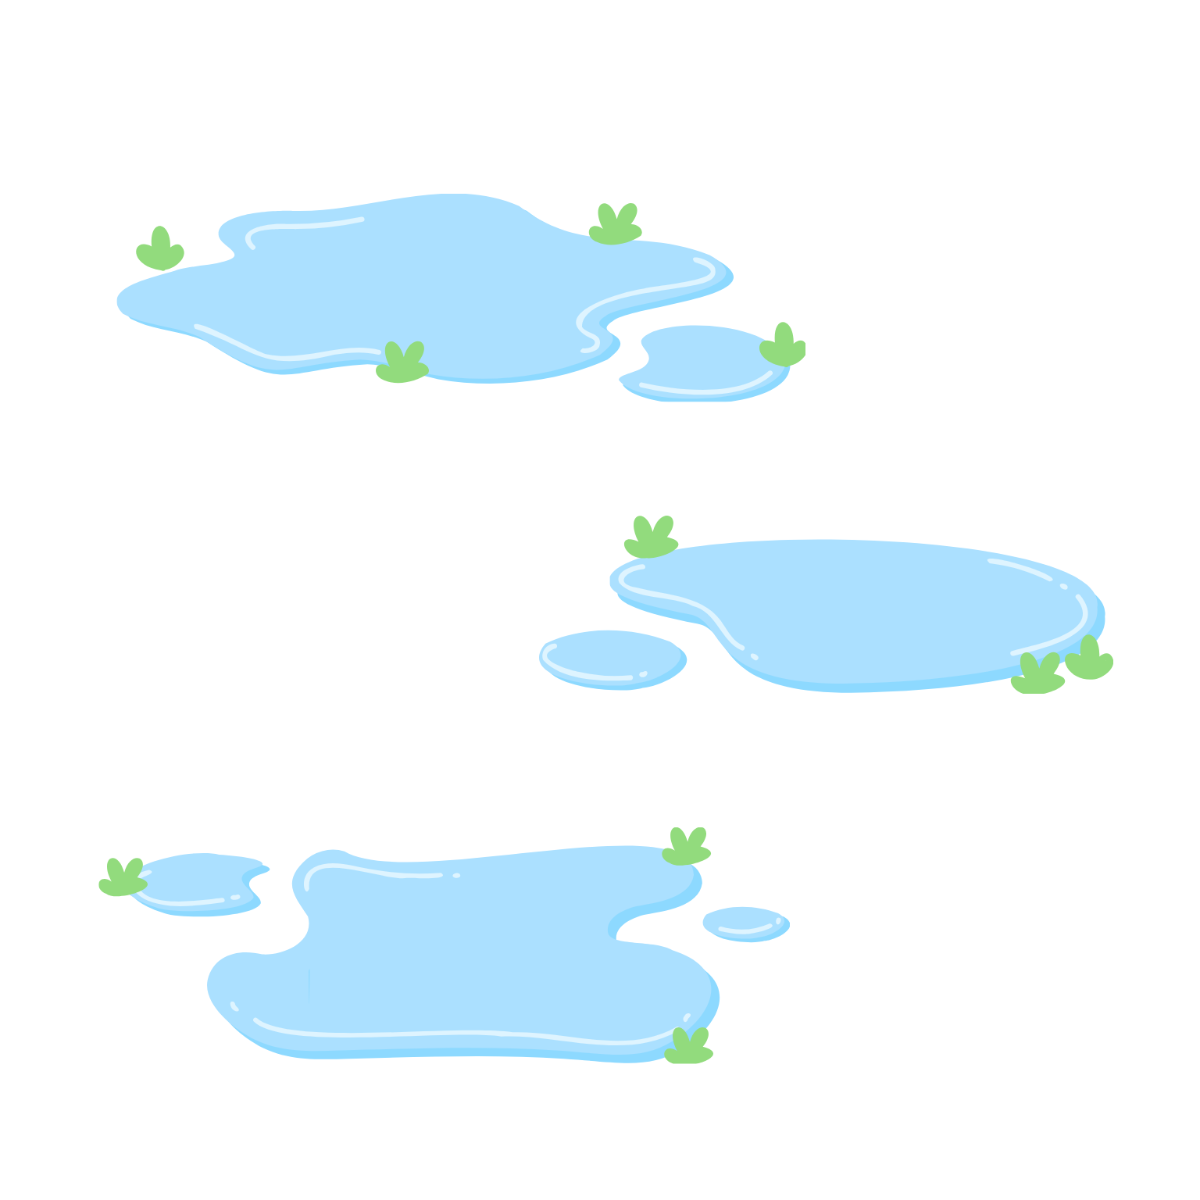 Free Puddle of Water Vector Template